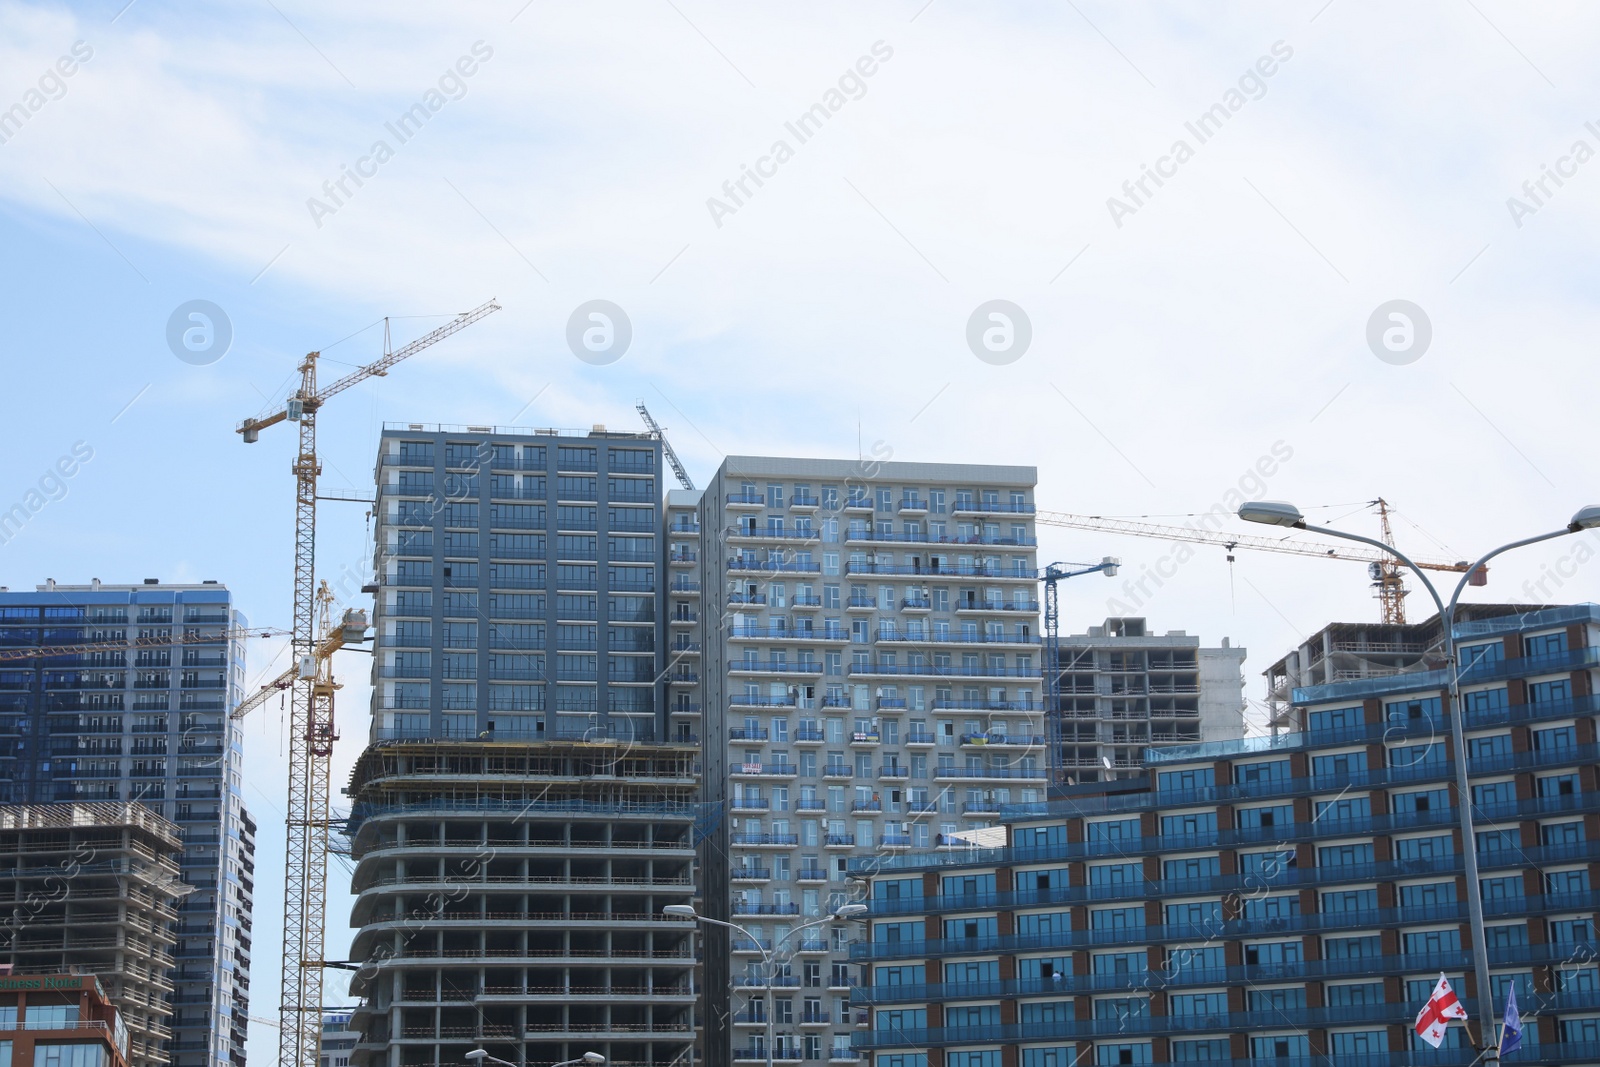 Photo of Batumi, Georgia - June 06, 2022: View of construction site with tower cranes near unfinished and modern buildings outdoors